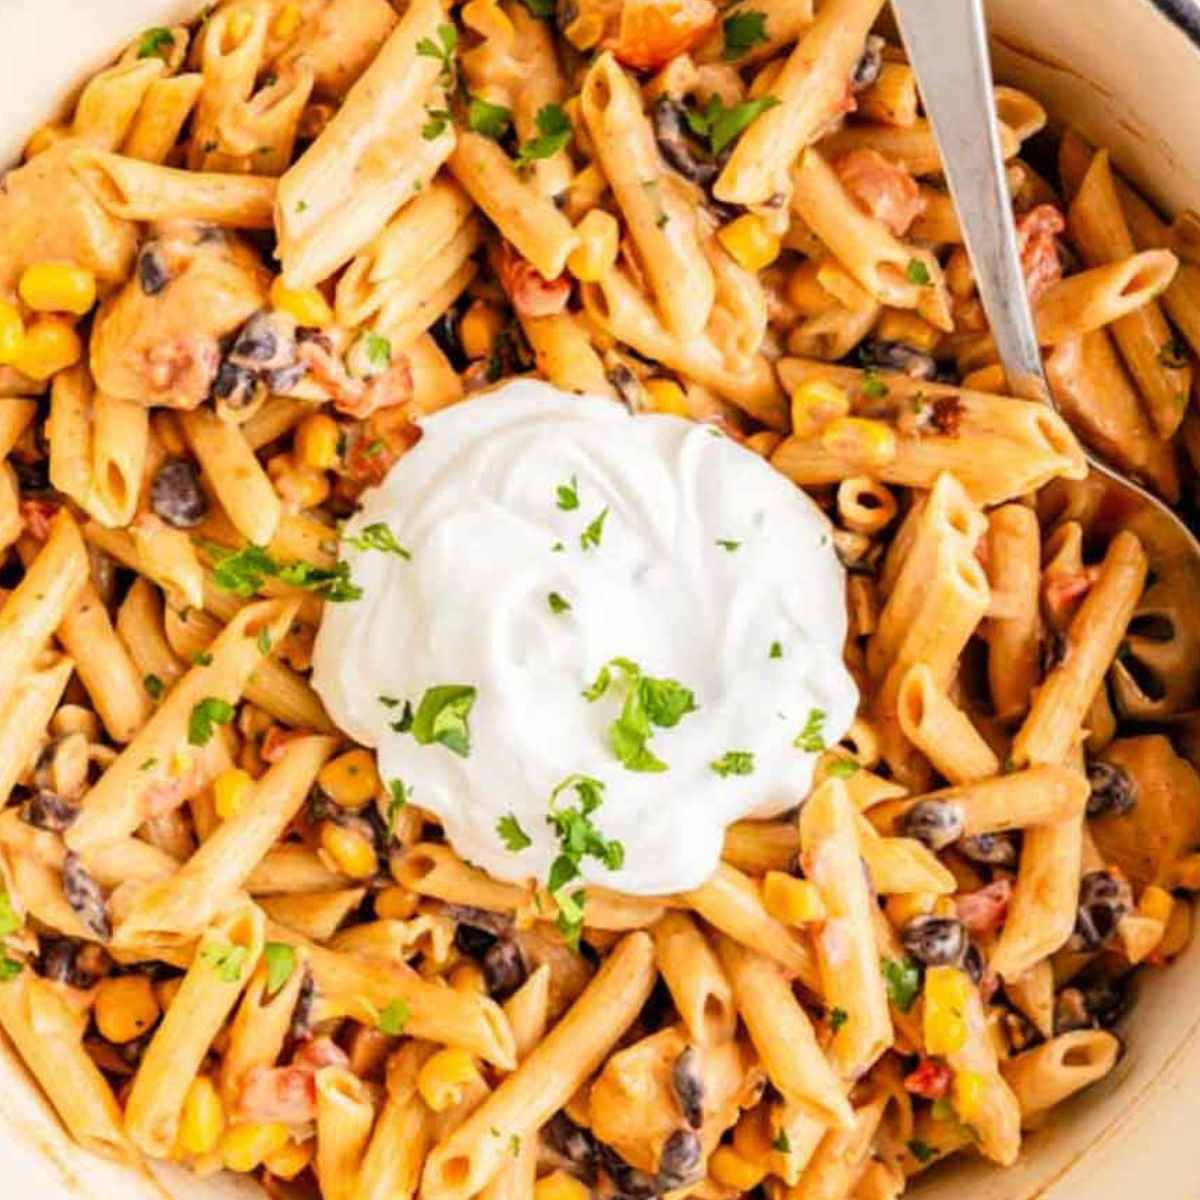 Creamy Southwest Chicken Pasta with a dollop of sour cream on top.